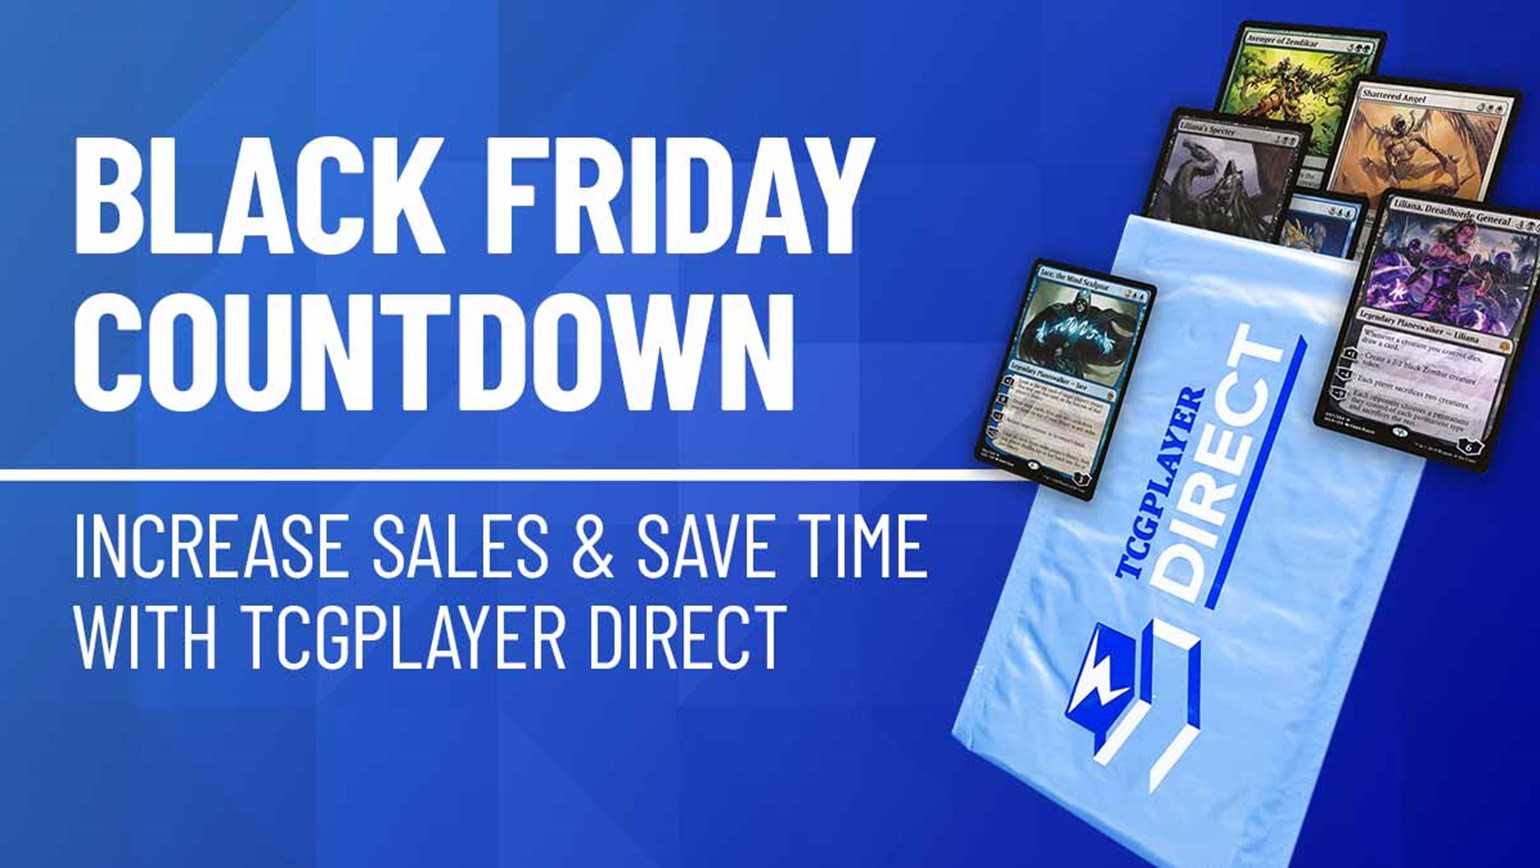 Black Friday Countdown: Increase Sales and Save Time with TCGplayer Direct